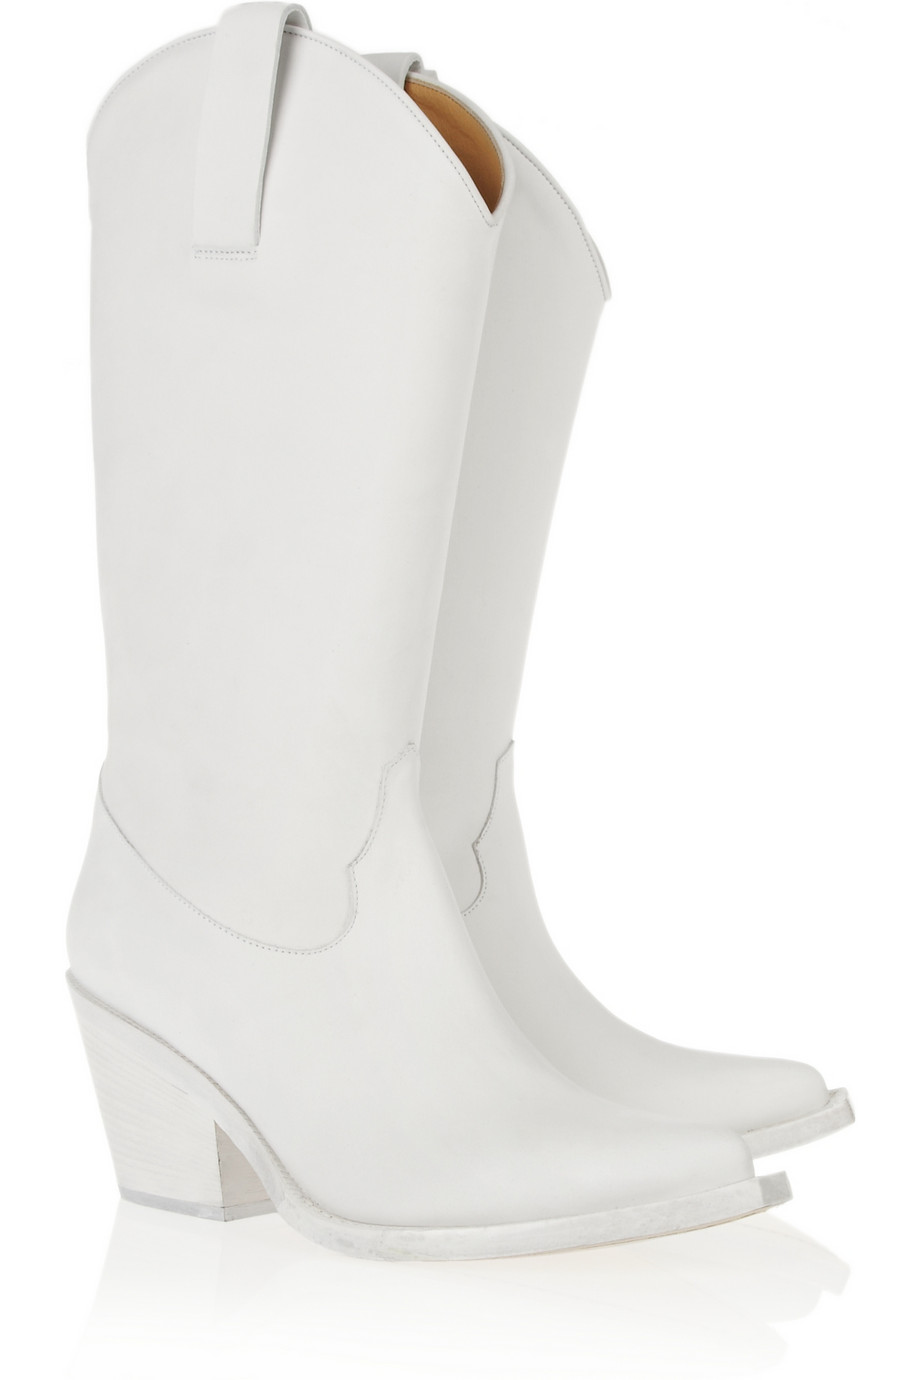 all white cowboy boots